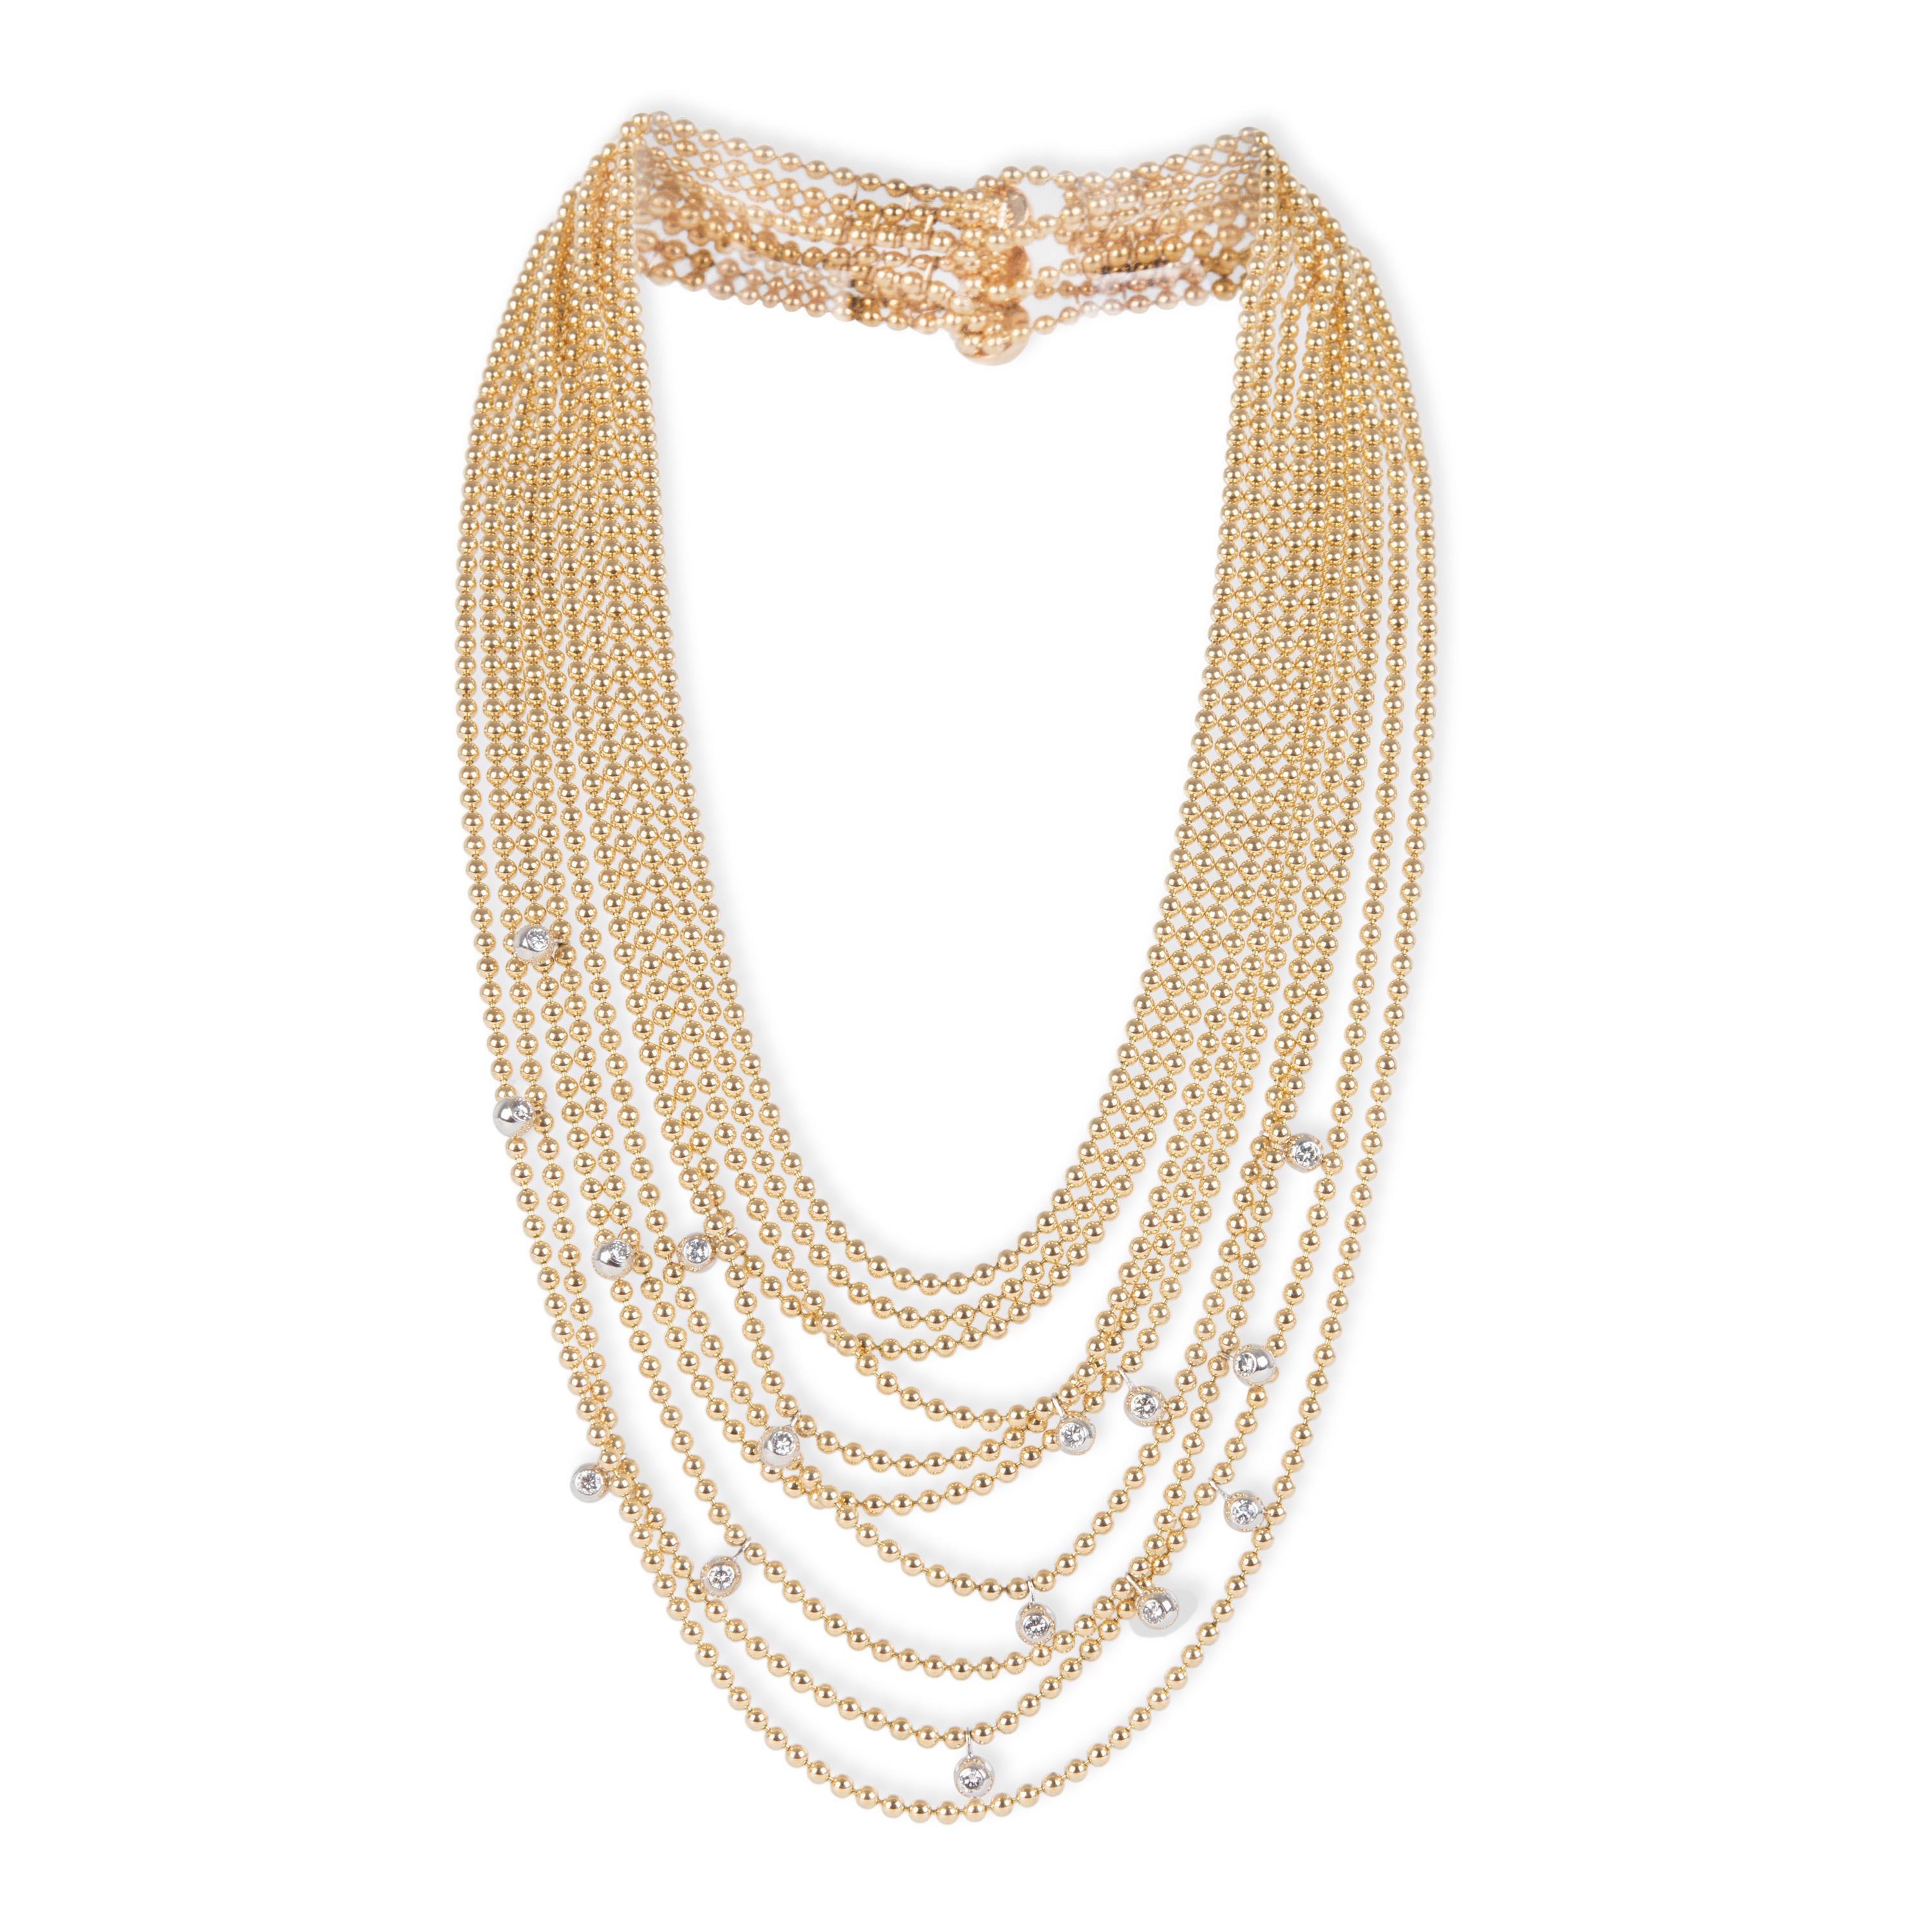 
Cartier Diamond Draperie De Decollete Necklace in 18K 2 Tone Gold 0.6 CTW

PRIMARY DETAILS
SKU: 105165
Listing Title: Cartier Diamond Draperie De Decollete Necklace in 18K 2 Tone Gold 0.6 CTW
Condition Description: Retails for 30000 USD. In